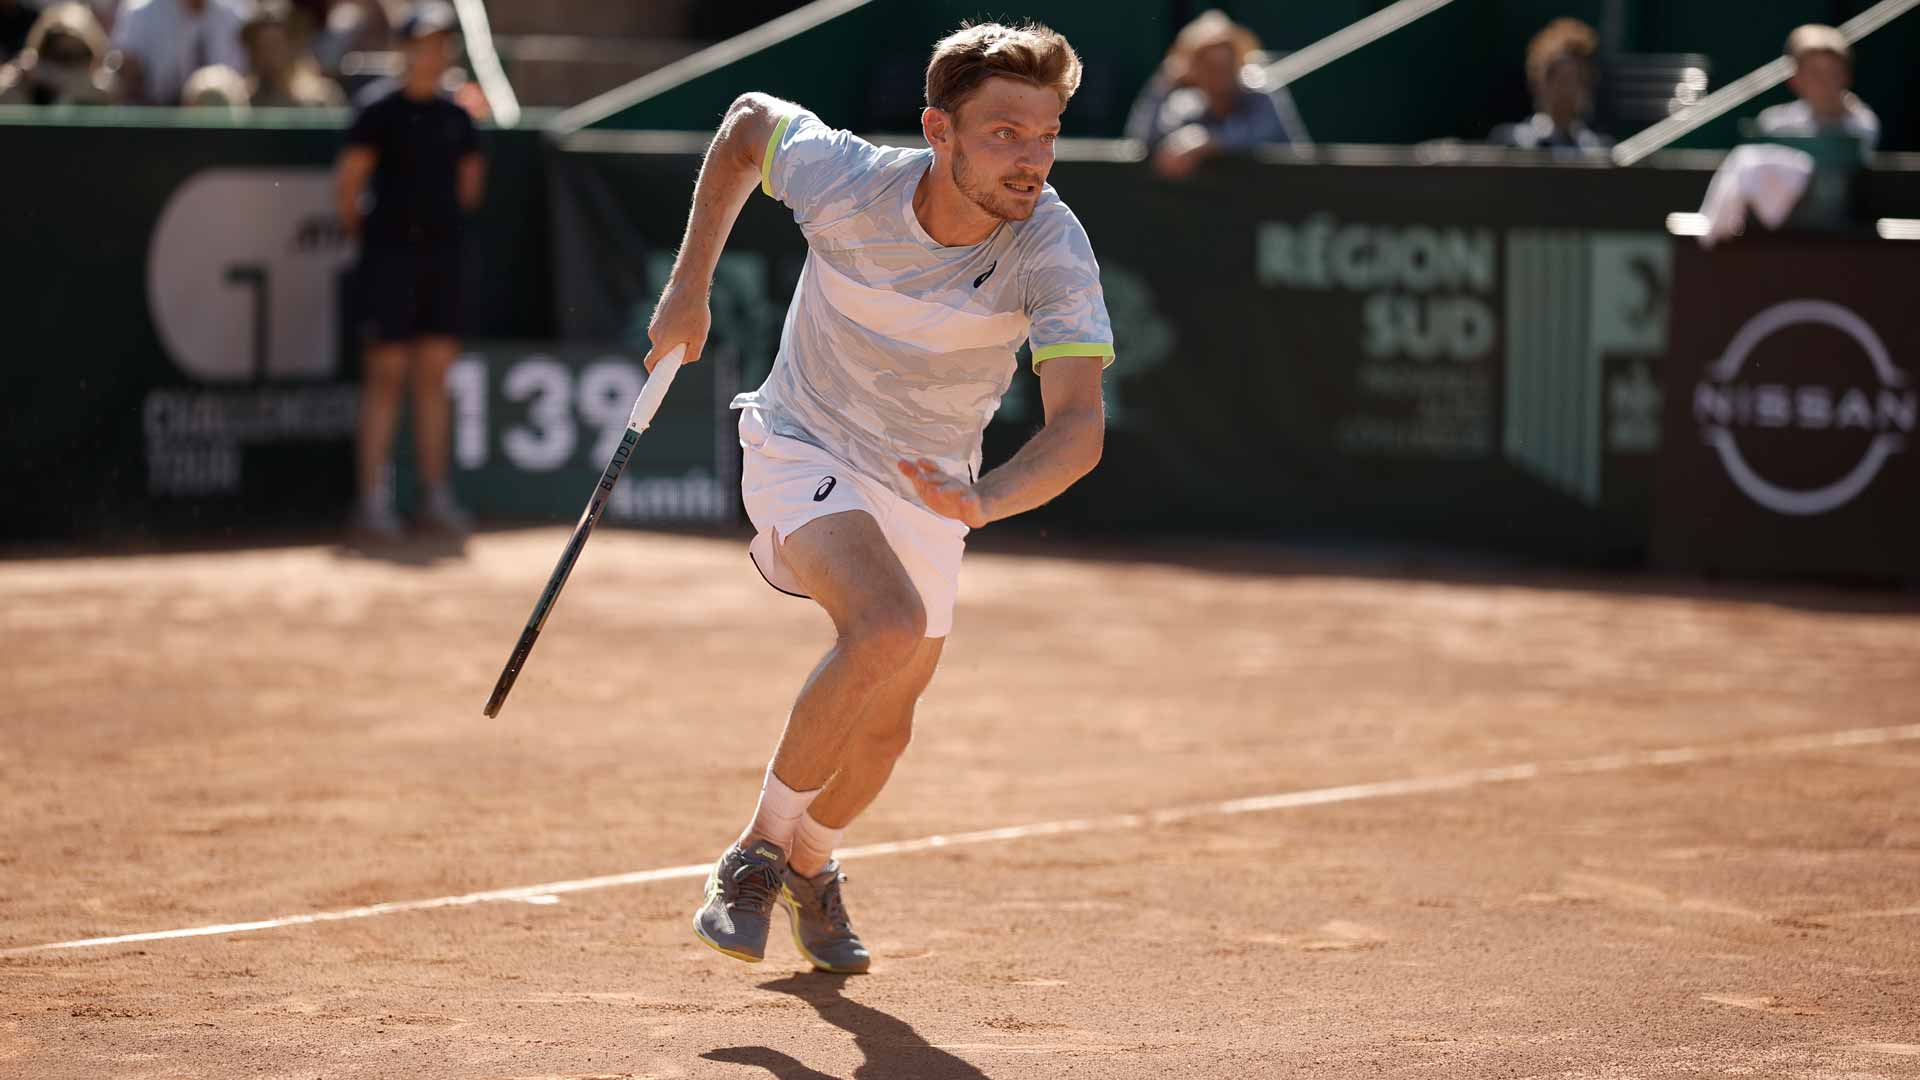 <a href='https://www.atptour.com/en/players/david-goffin/gb88/overview'>David Goffin</a> in action at the ATP Challenger 175 event in Aix-en-Provence, France.